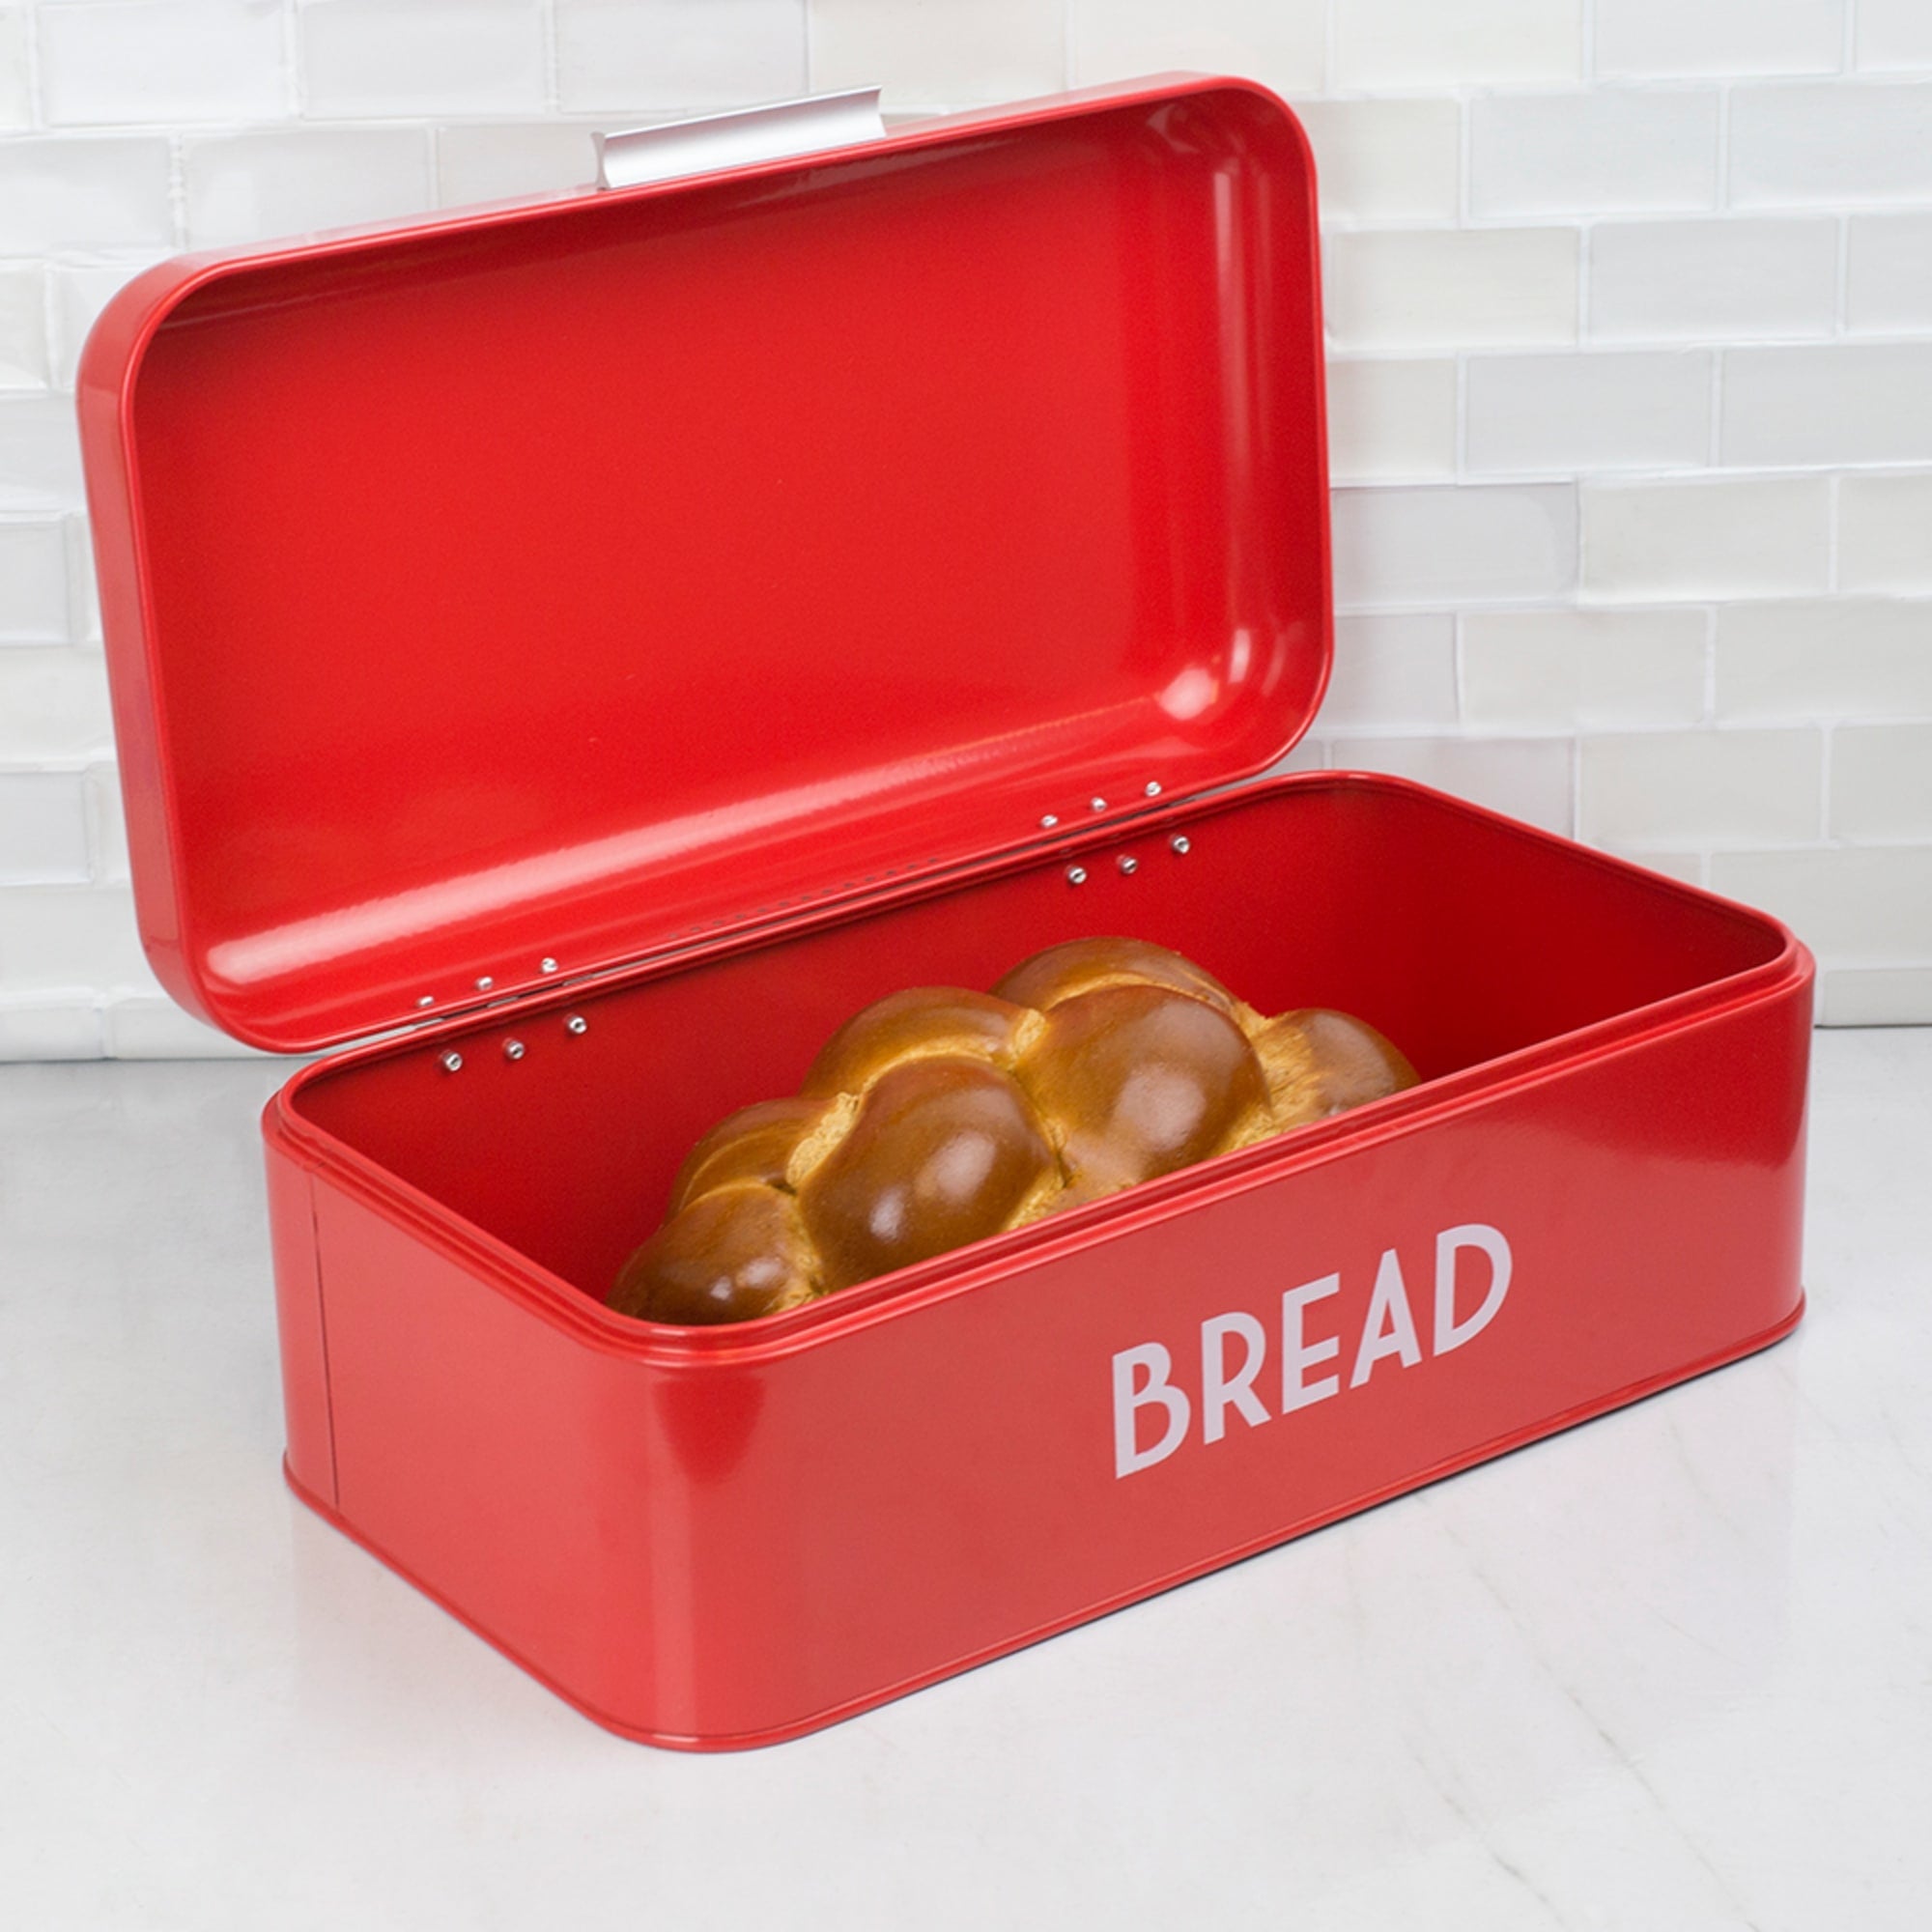 Home Basics Metal Bread Box with Lid $25.00 EACH, CASE PACK OF 4